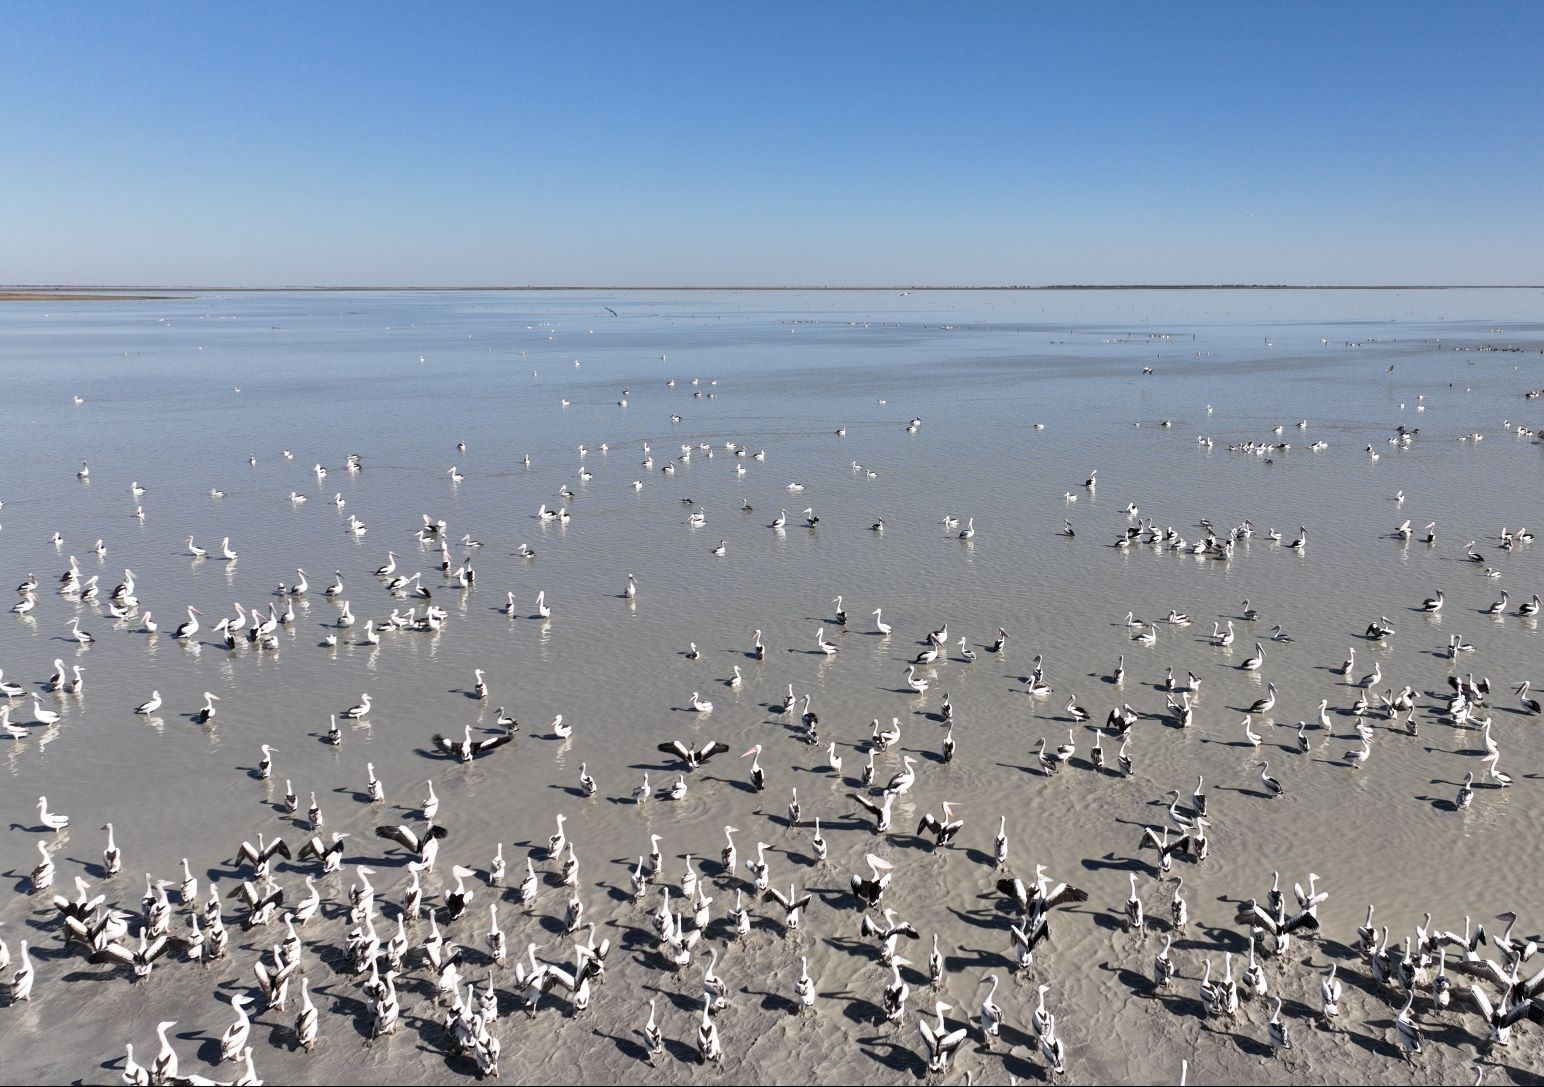 There has been a significant decline in waterbird numbers along eastern Australia since the 1980s, but recent successful breeding events are helping to replenish bird populations. Photo: Shot by Harro for UNSW.